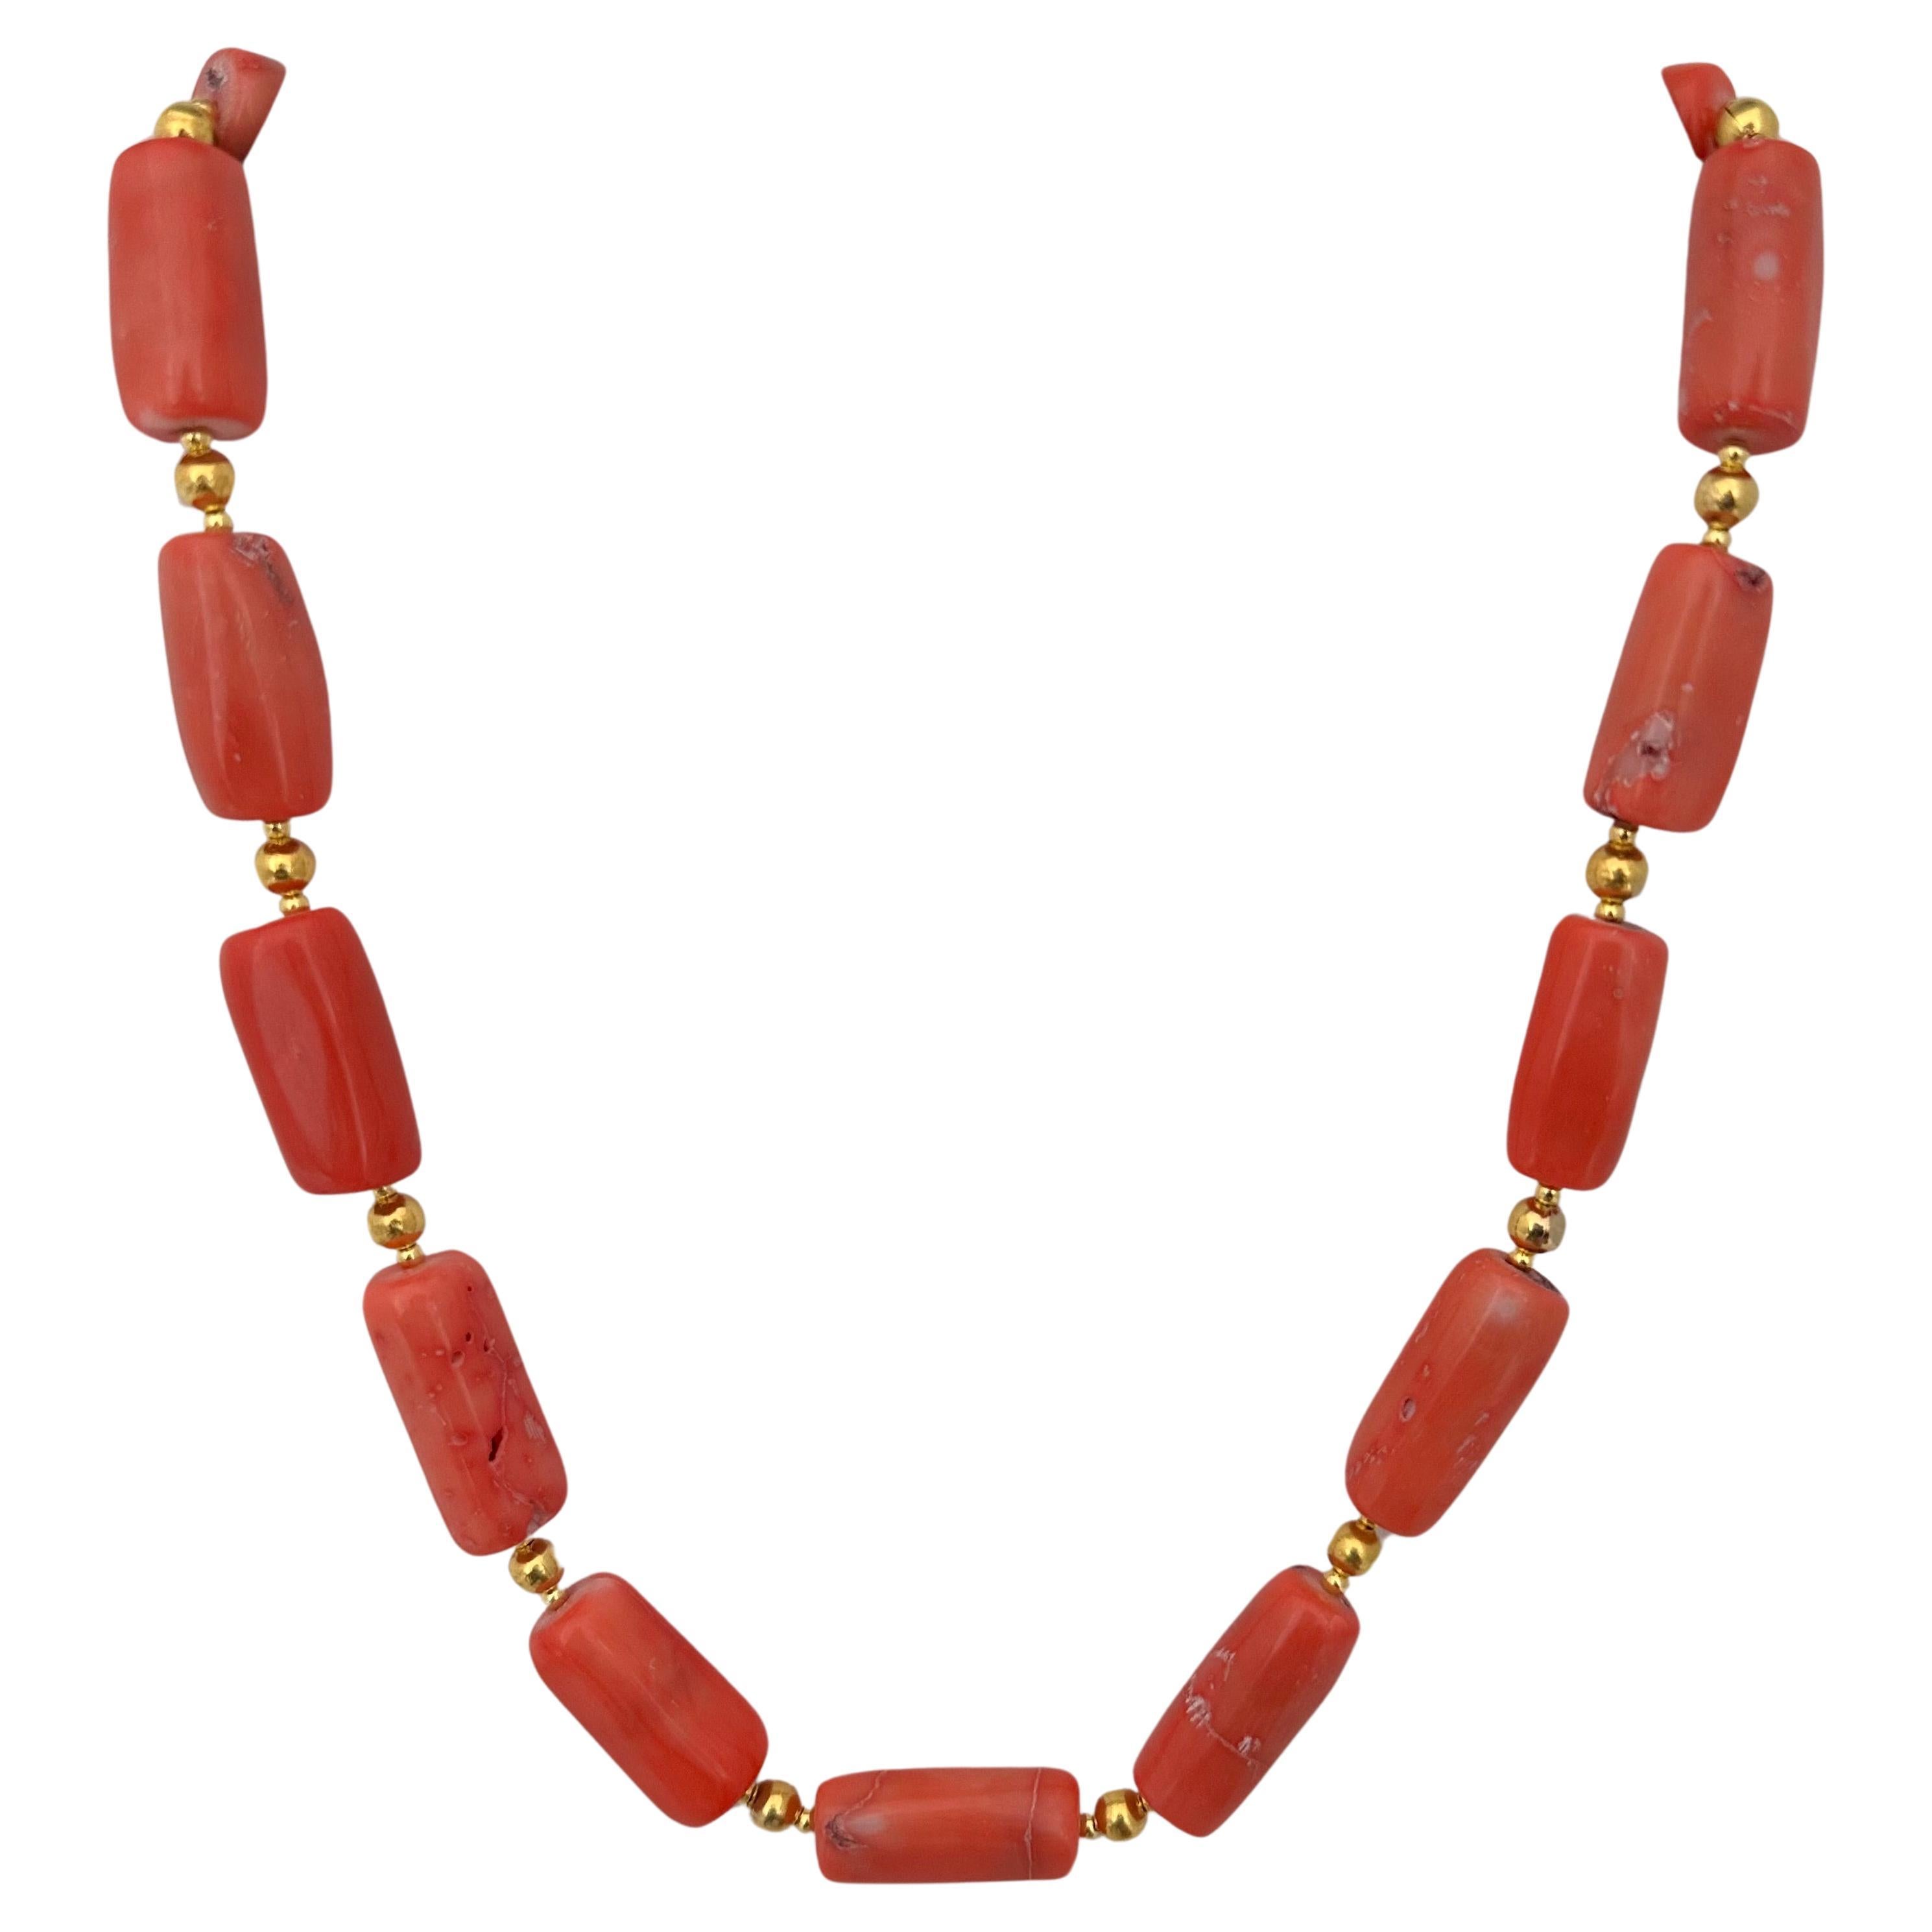 Handmade Gold Plated Beads & Salmon Barrel Shape Coral Beaded 24" Necklace #C40 For Sale